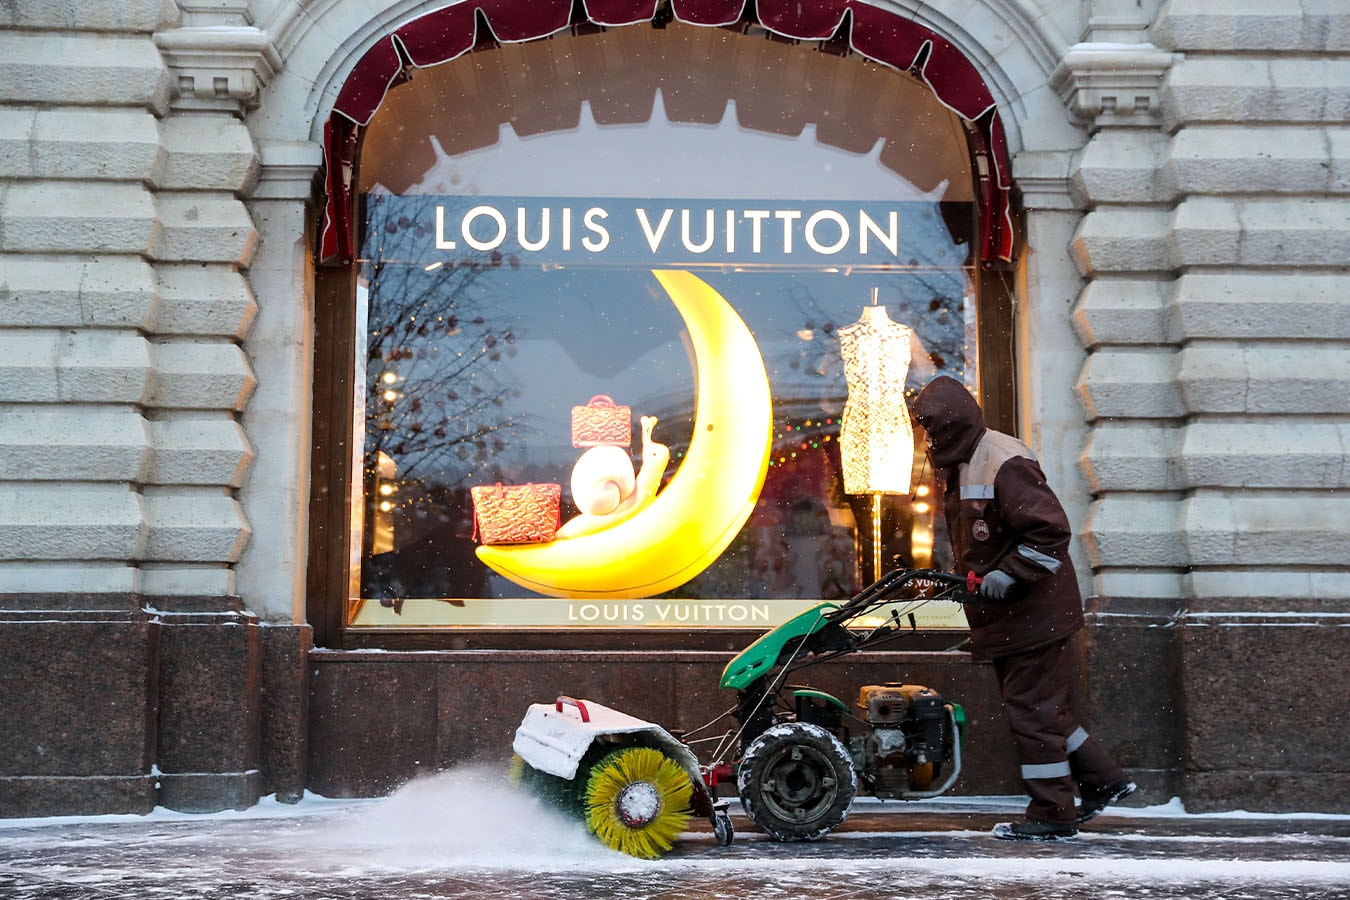 LVMH to 'temporarily' close its 124 shops in Russia